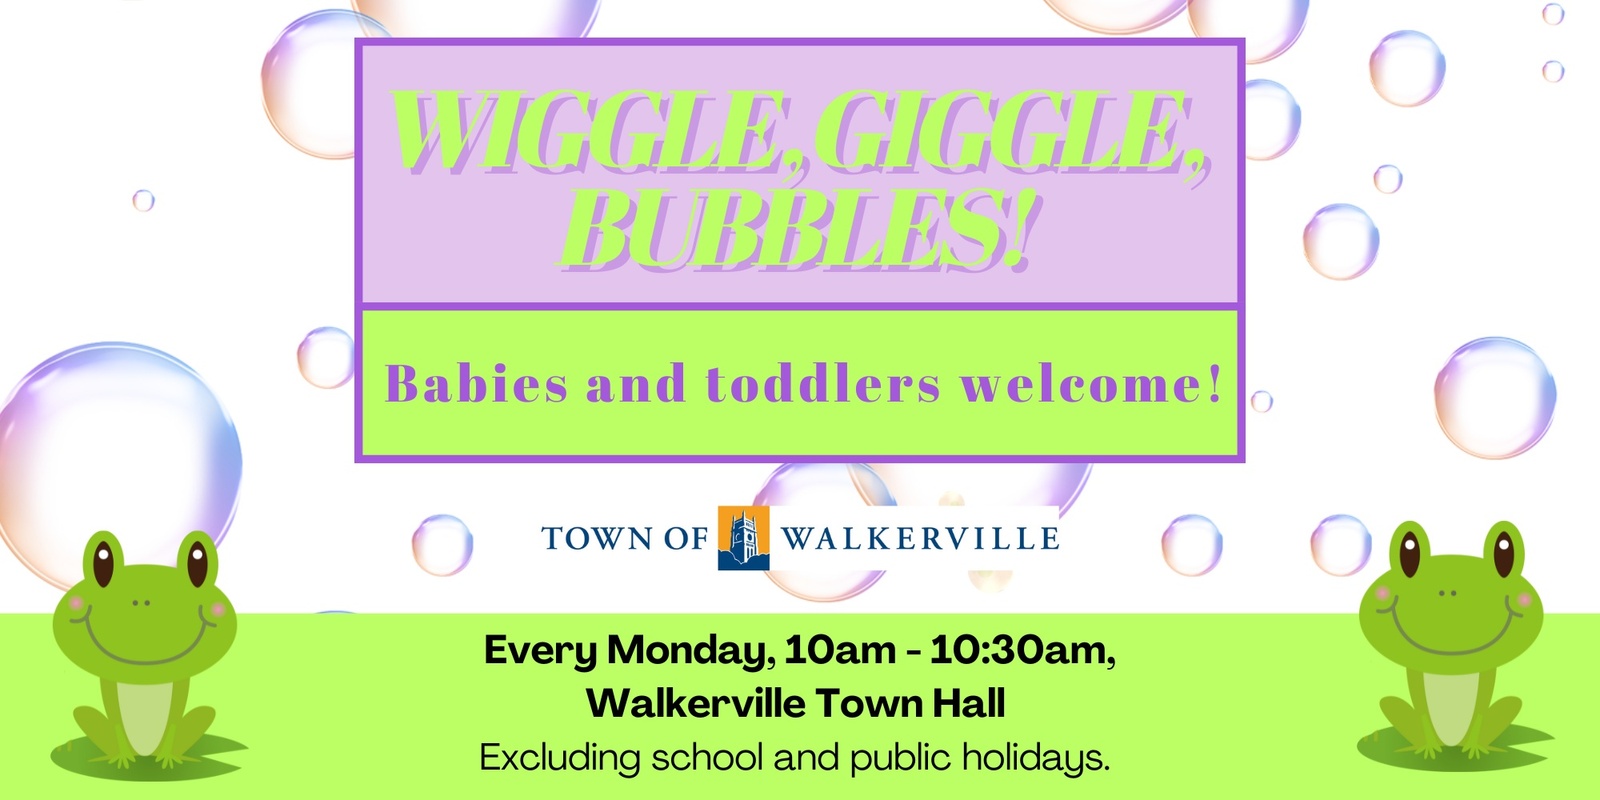 Banner image for Wiggle, Giggle, Bubbles 